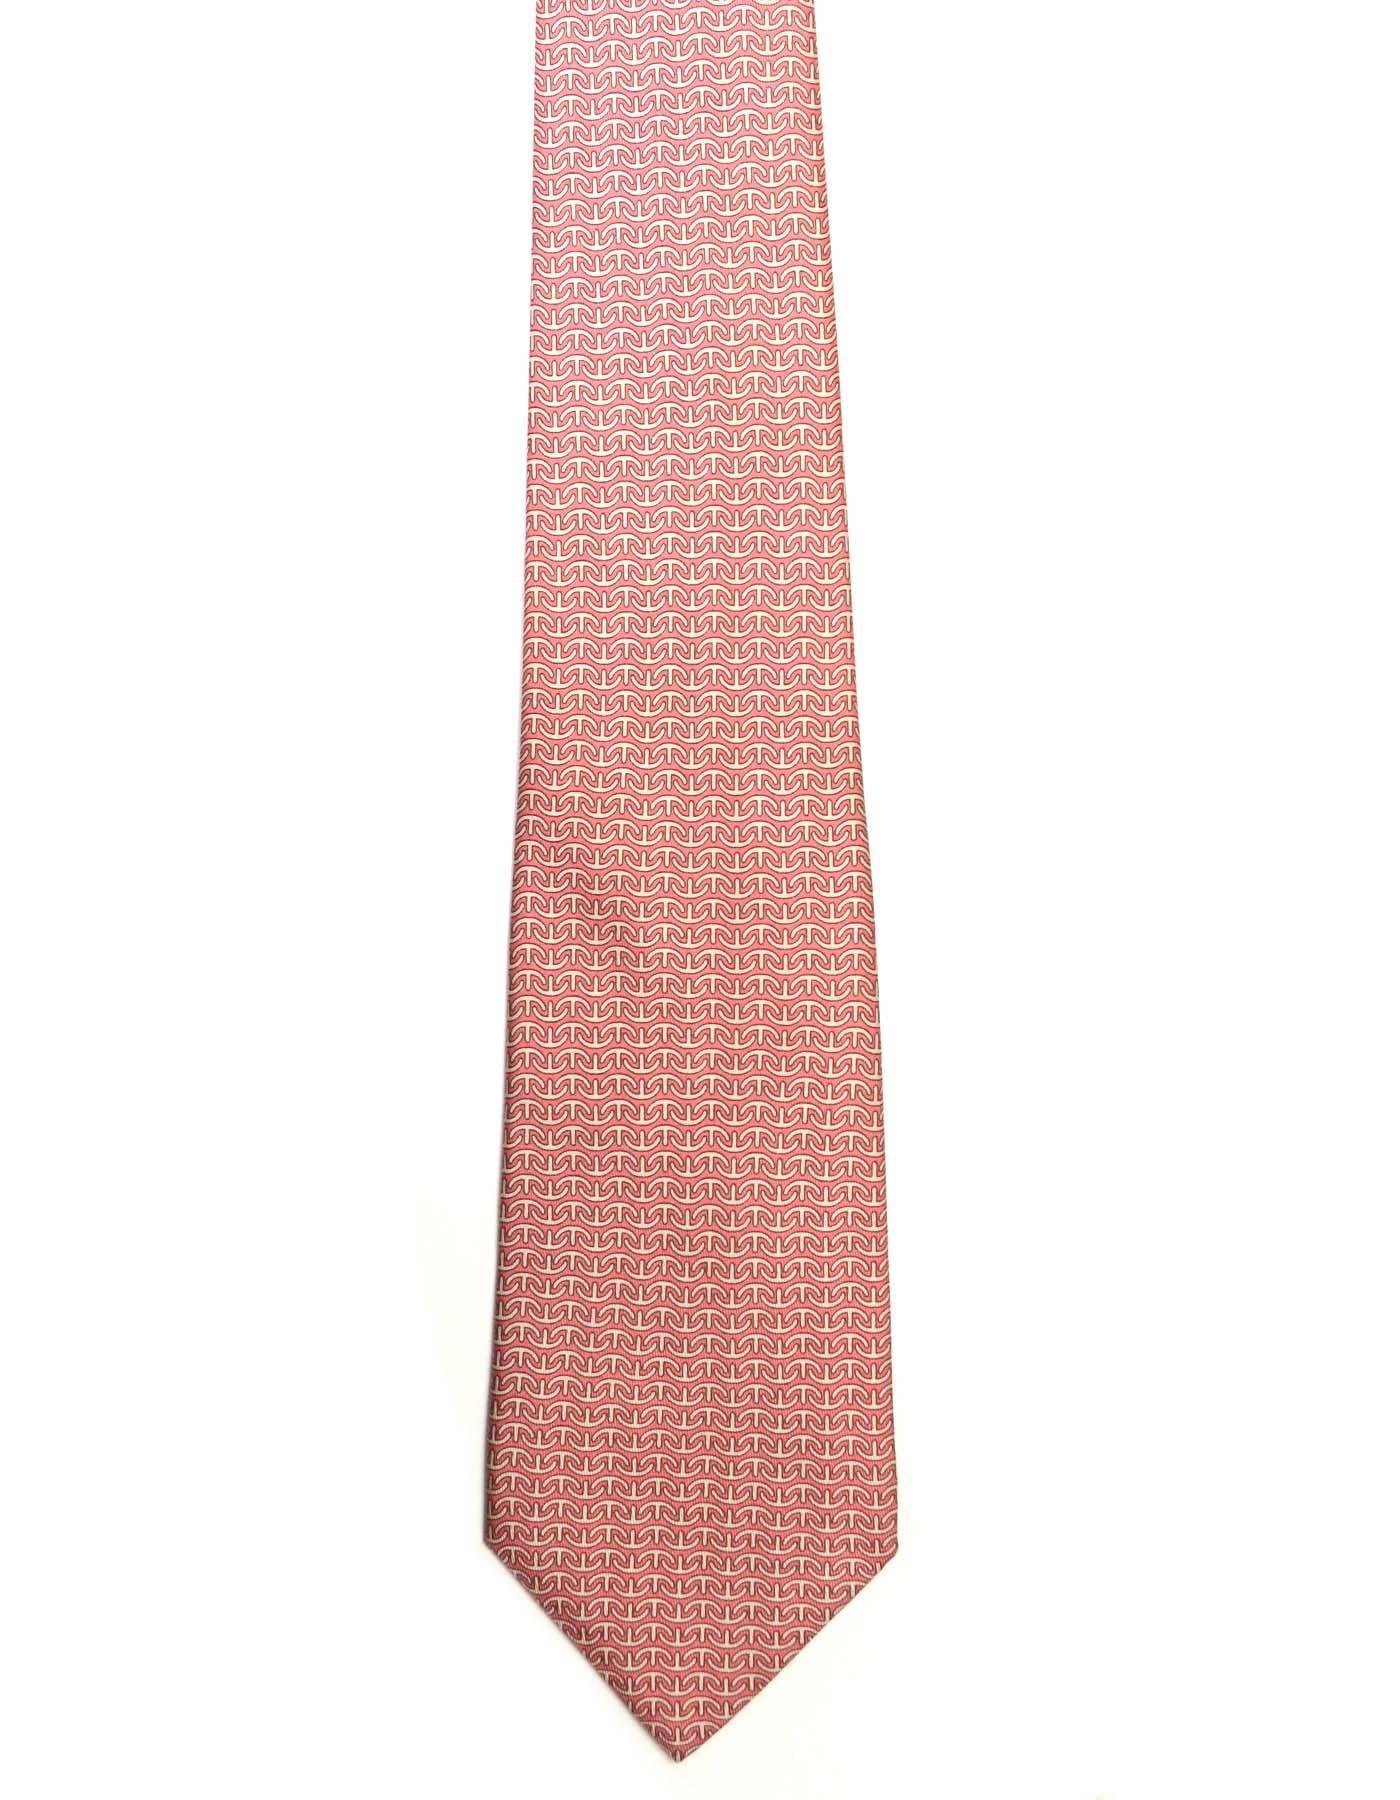 Hermes Pink Anchor Print Silk Tie
Made In: France
Color: Pink and beige
Composition: 100% silk
Overall Condition: Excellent pre-owned condition with the exception of a large, faint soiling spot towards bottom of tie (ref image)
Measurements: